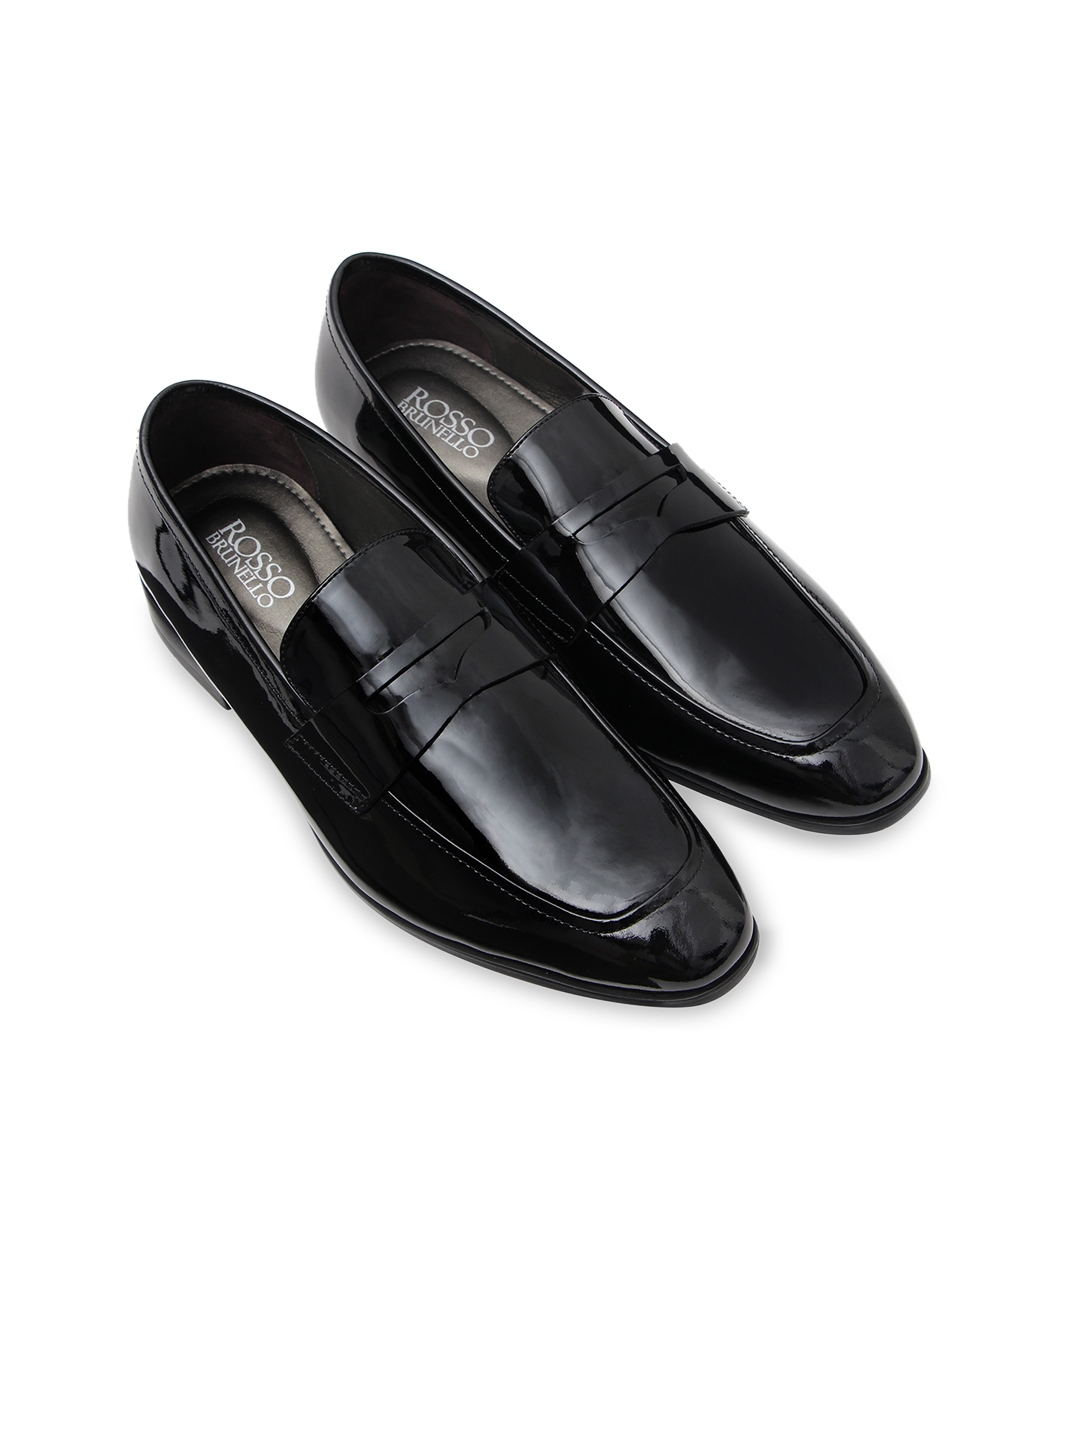 Buy ROSSO BRUNELLO Men Black Solid Formal Leather Penny Loafers ...